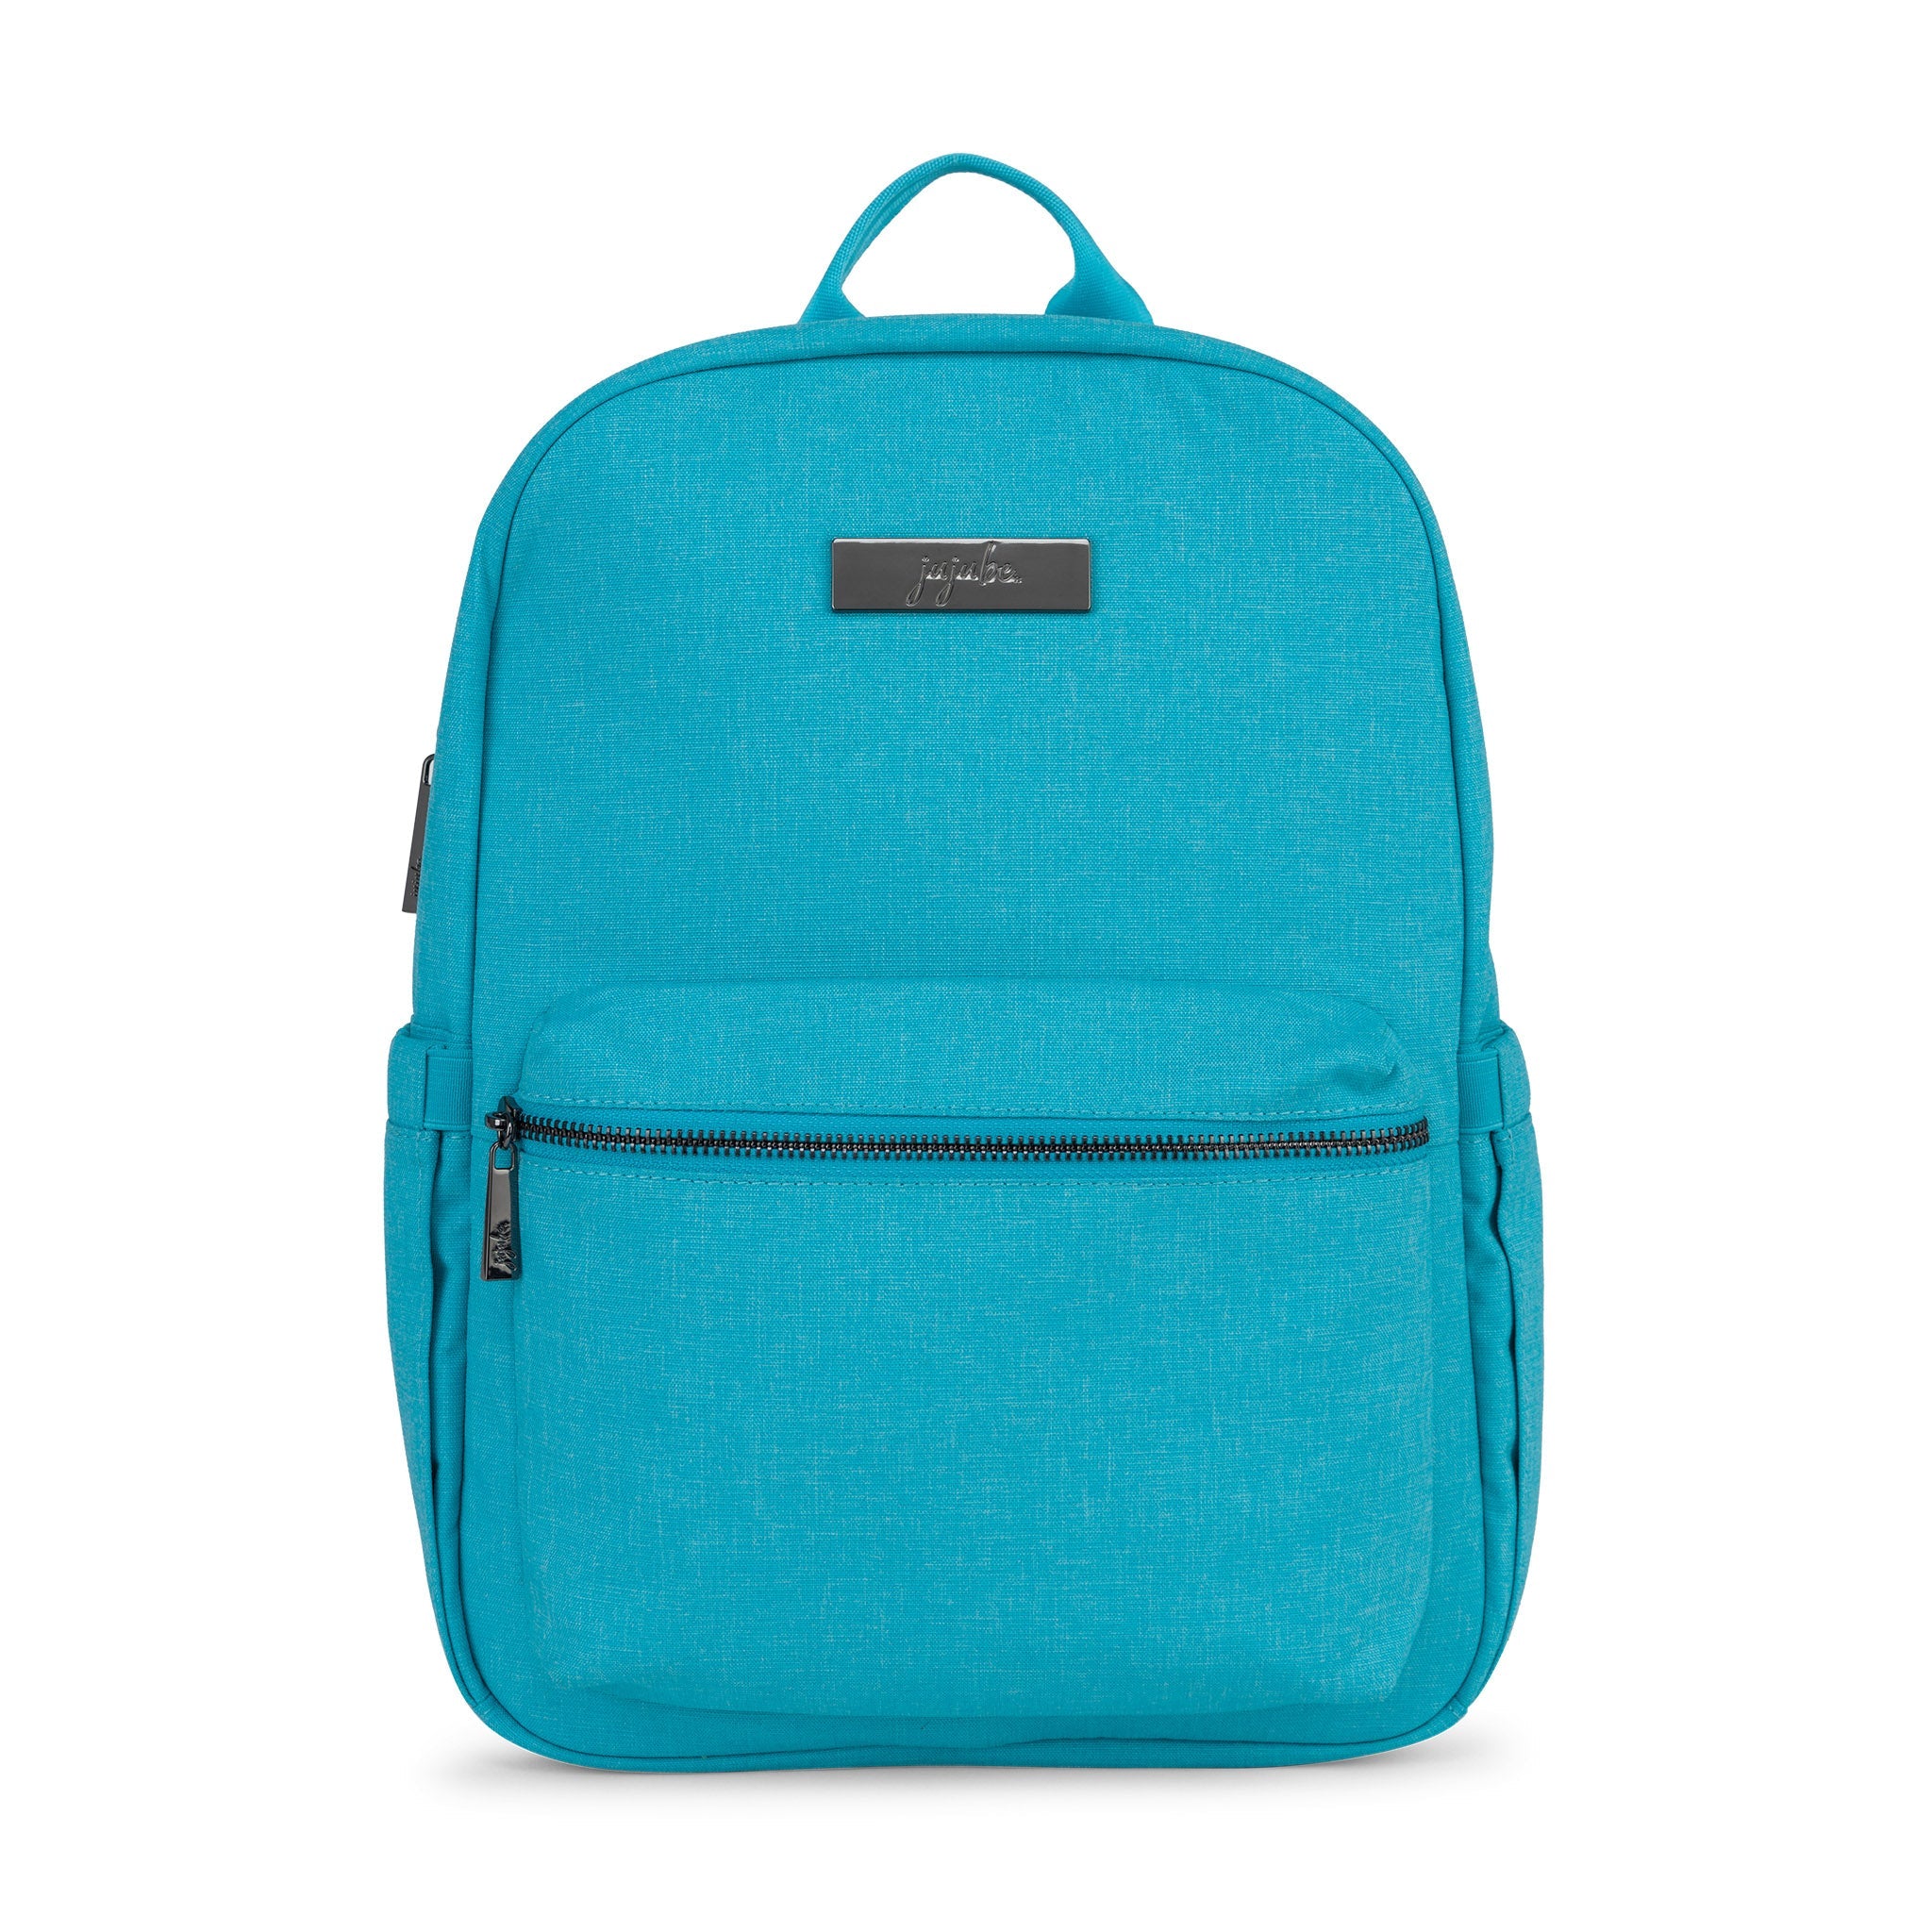 JuJuBe Fluorescents Collection Electric Blue Midi Backpack-JU-JU-BE-Little Giant Kidz